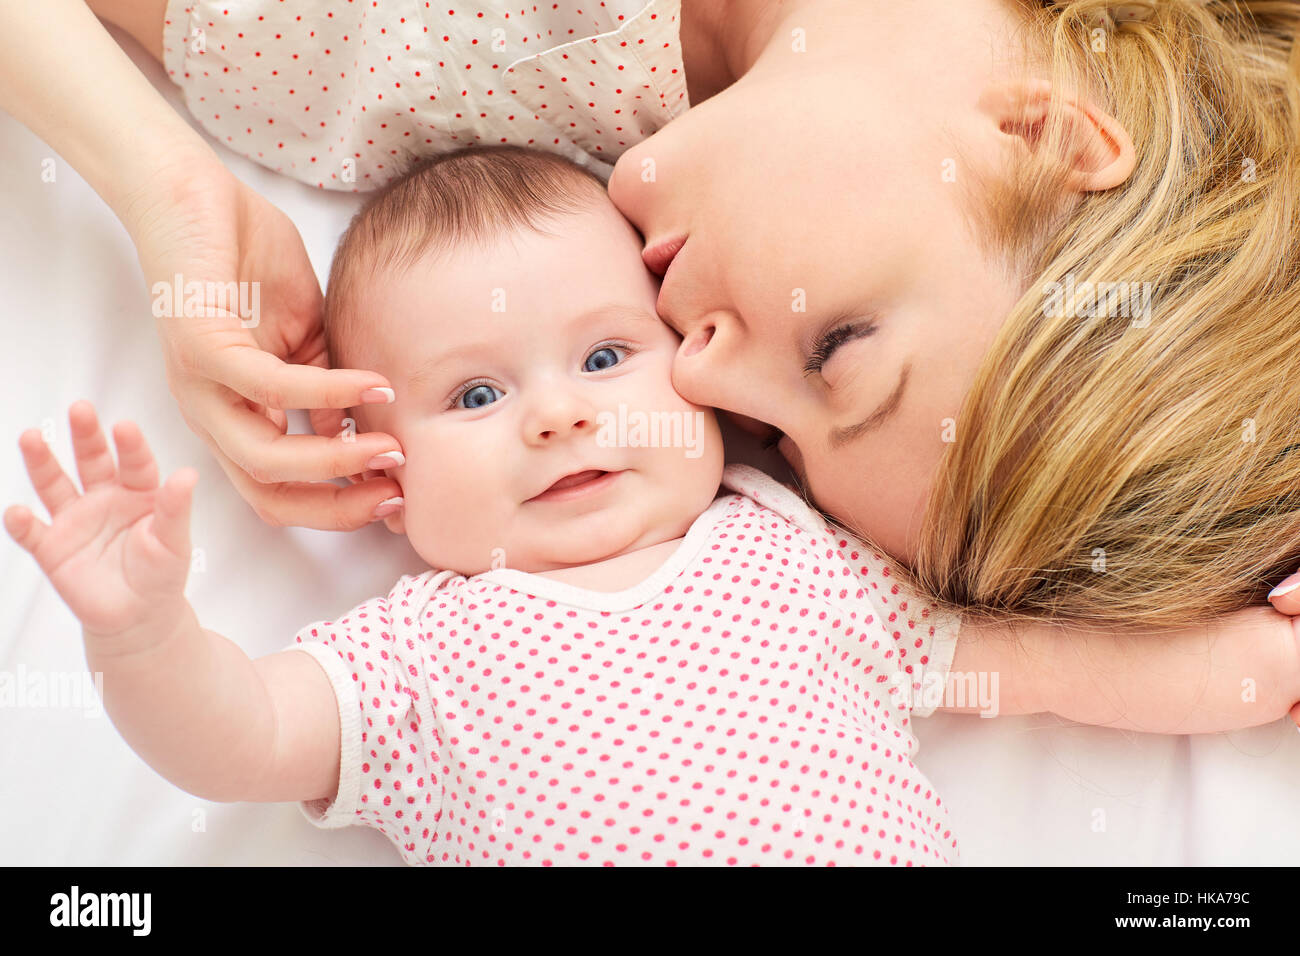 Mum kisses baby on the bed Stock Photo